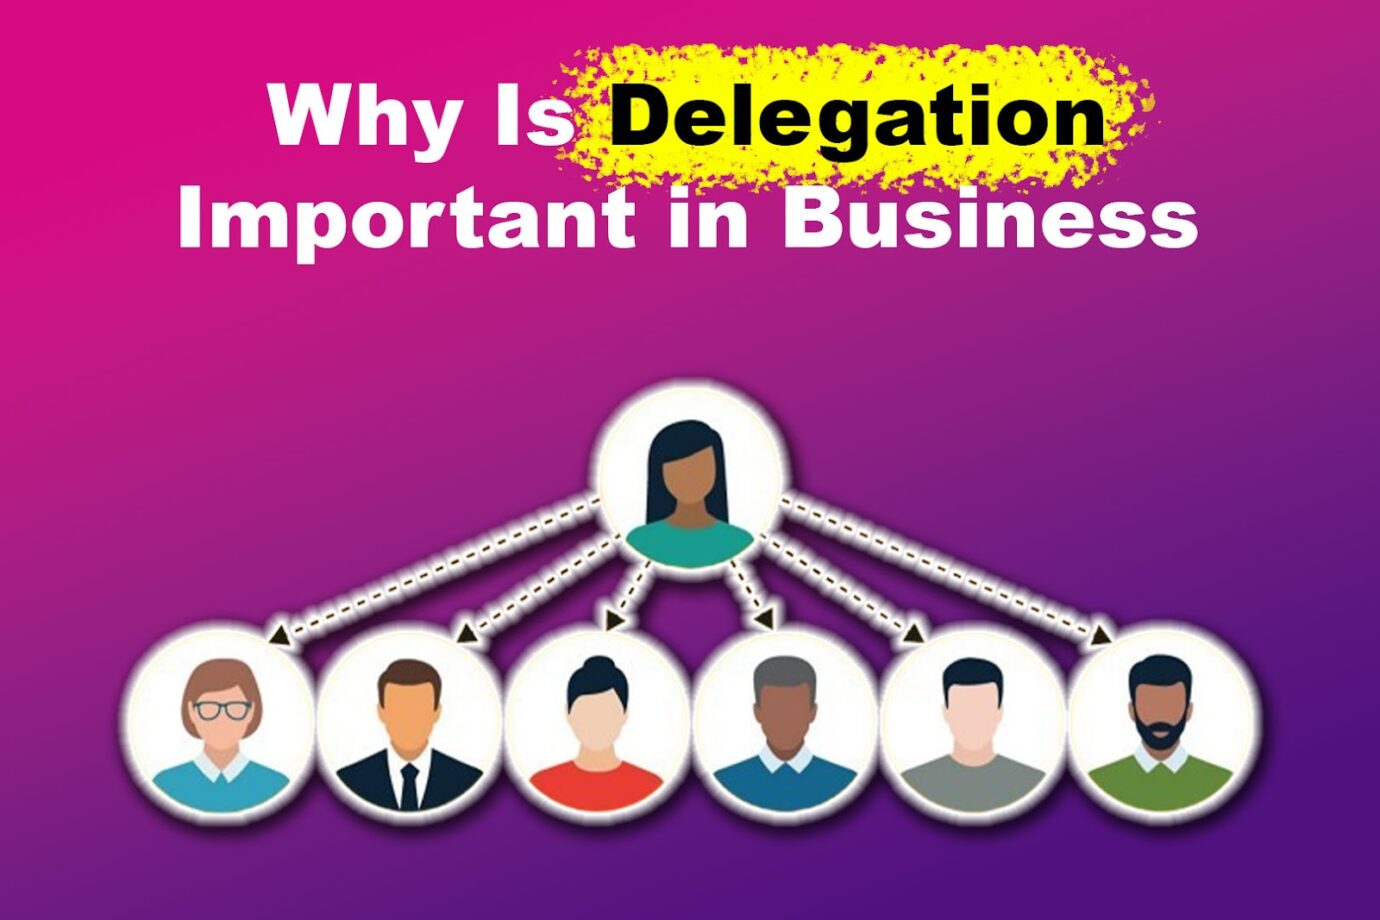 Why Is Delegation Important in Business